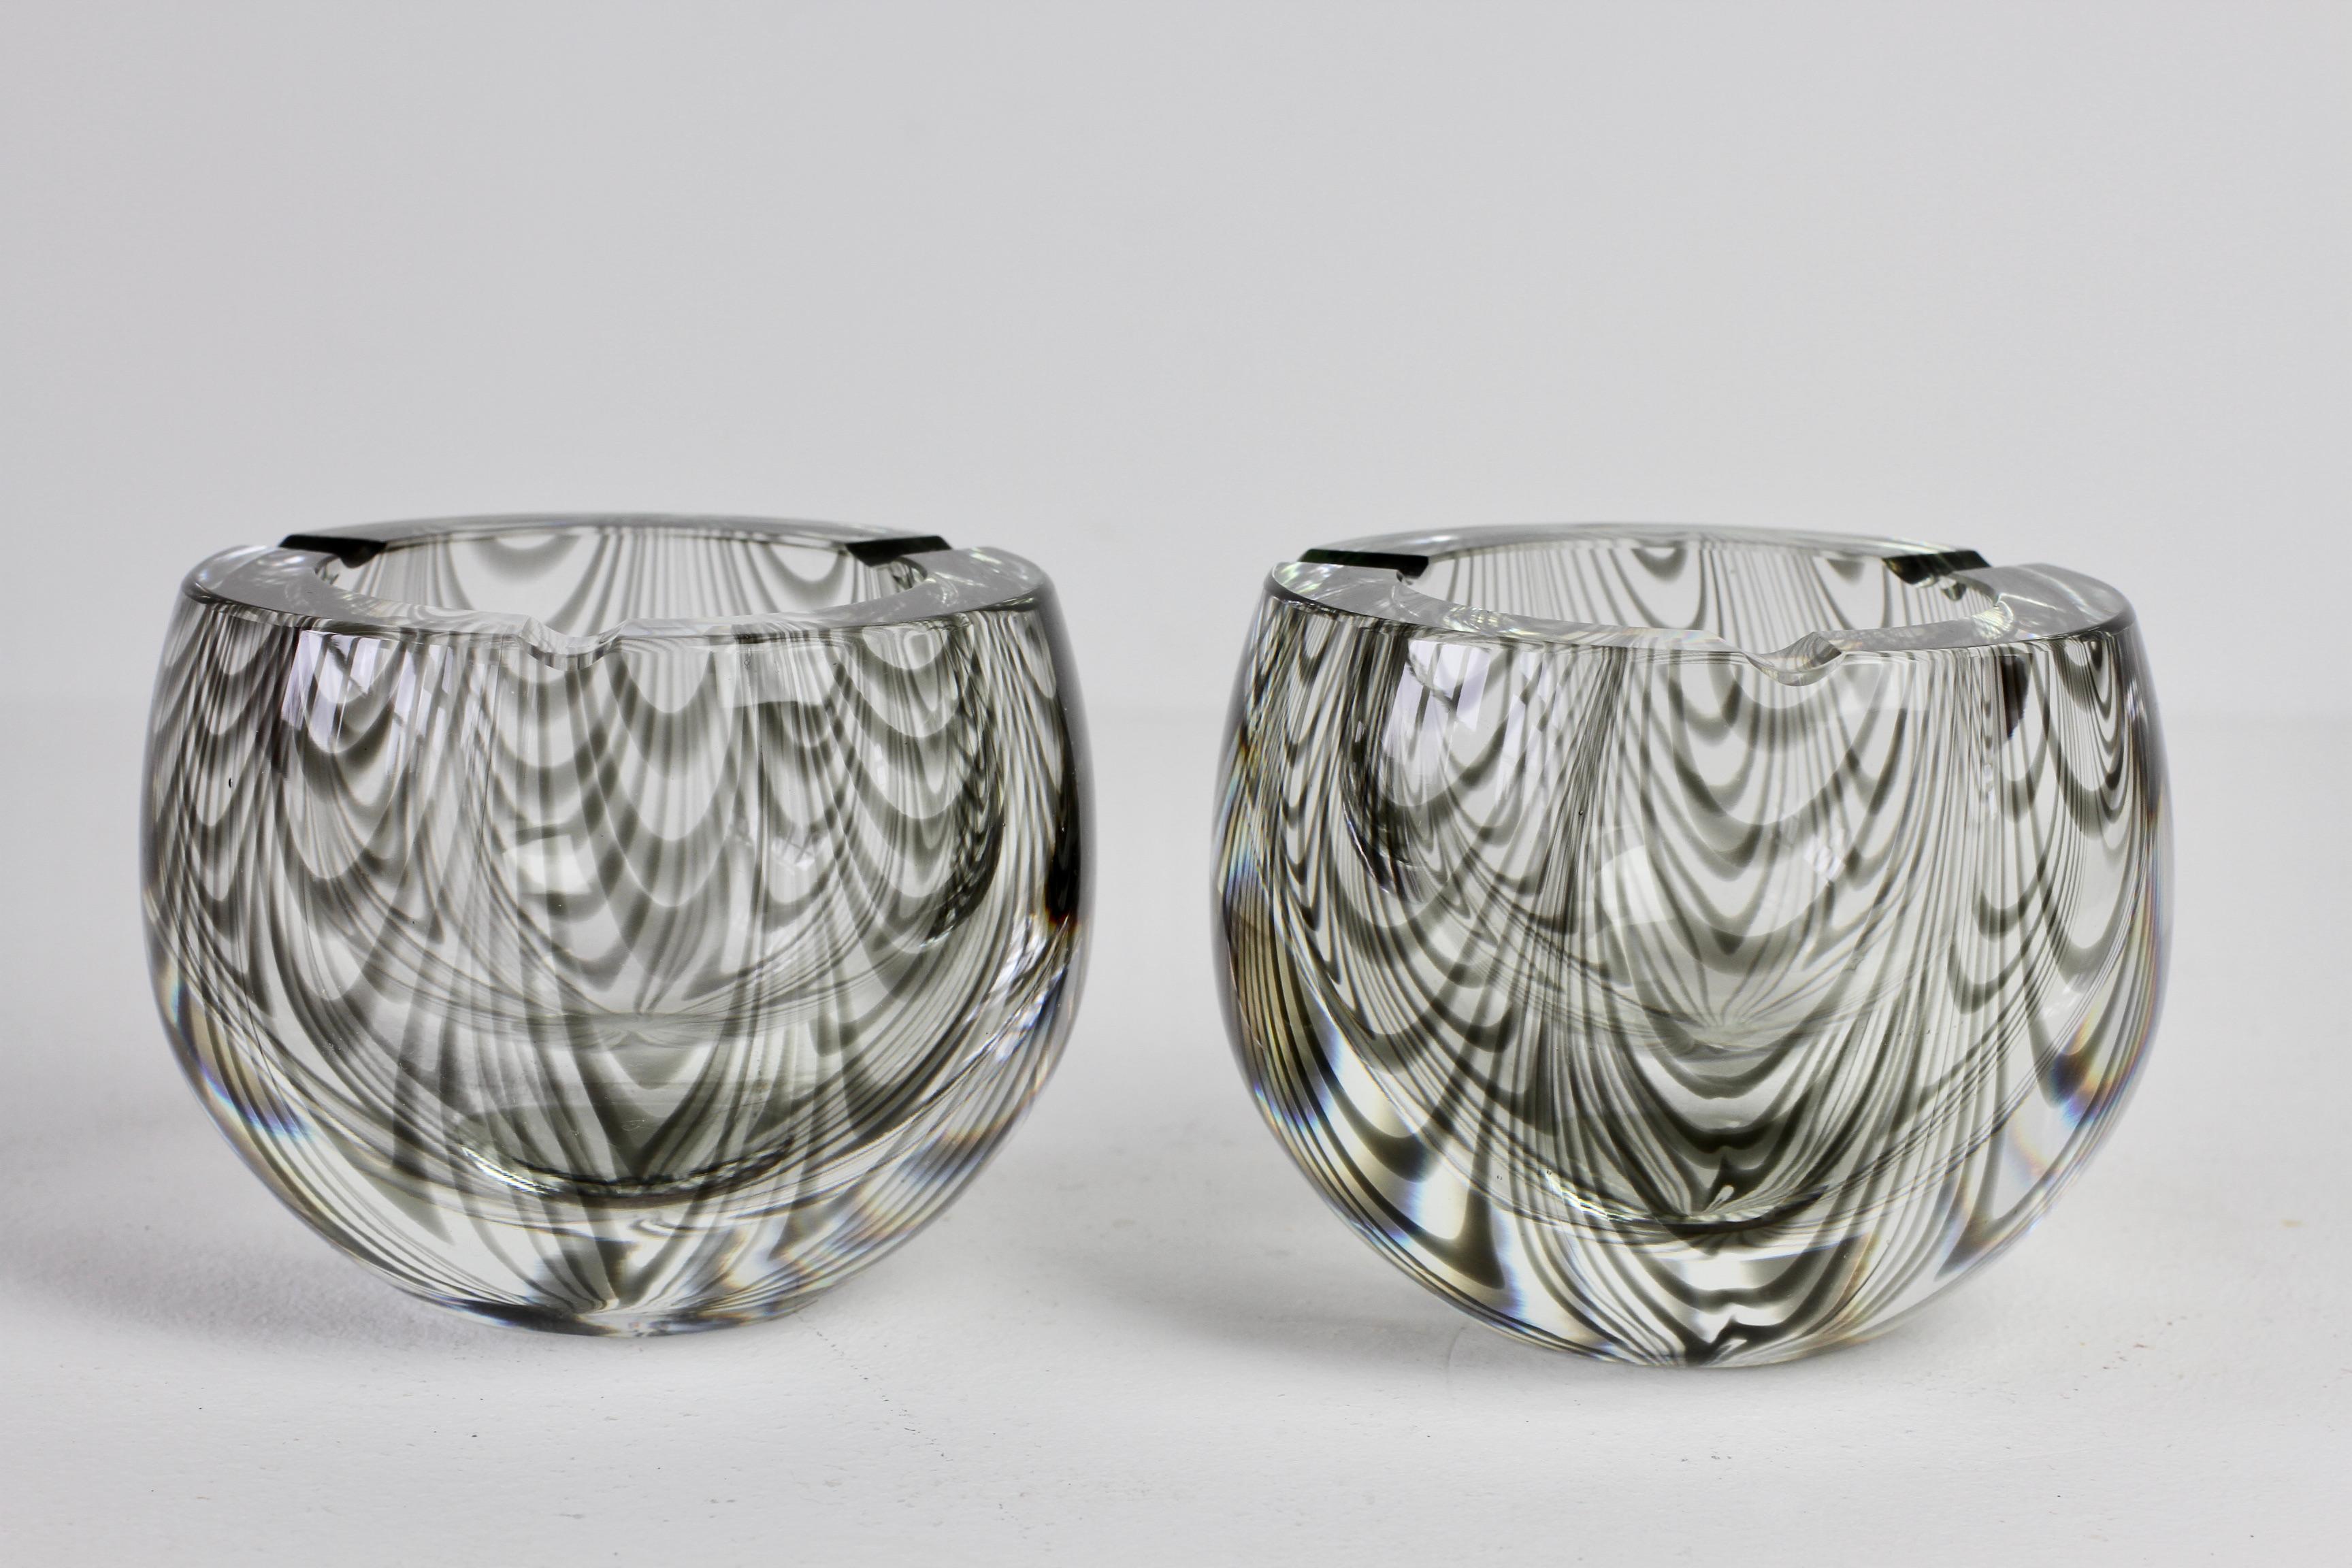 Antonio da Ros (attributed) for Cenedese rare 'new old stock' vintage Mid-Century Modern pair of Italian Murano glass ashtrays, circa 1965-1975. These heavy pieces of glass feature an asymmetric design of grey / gray toned glass curved 'Zebrato'